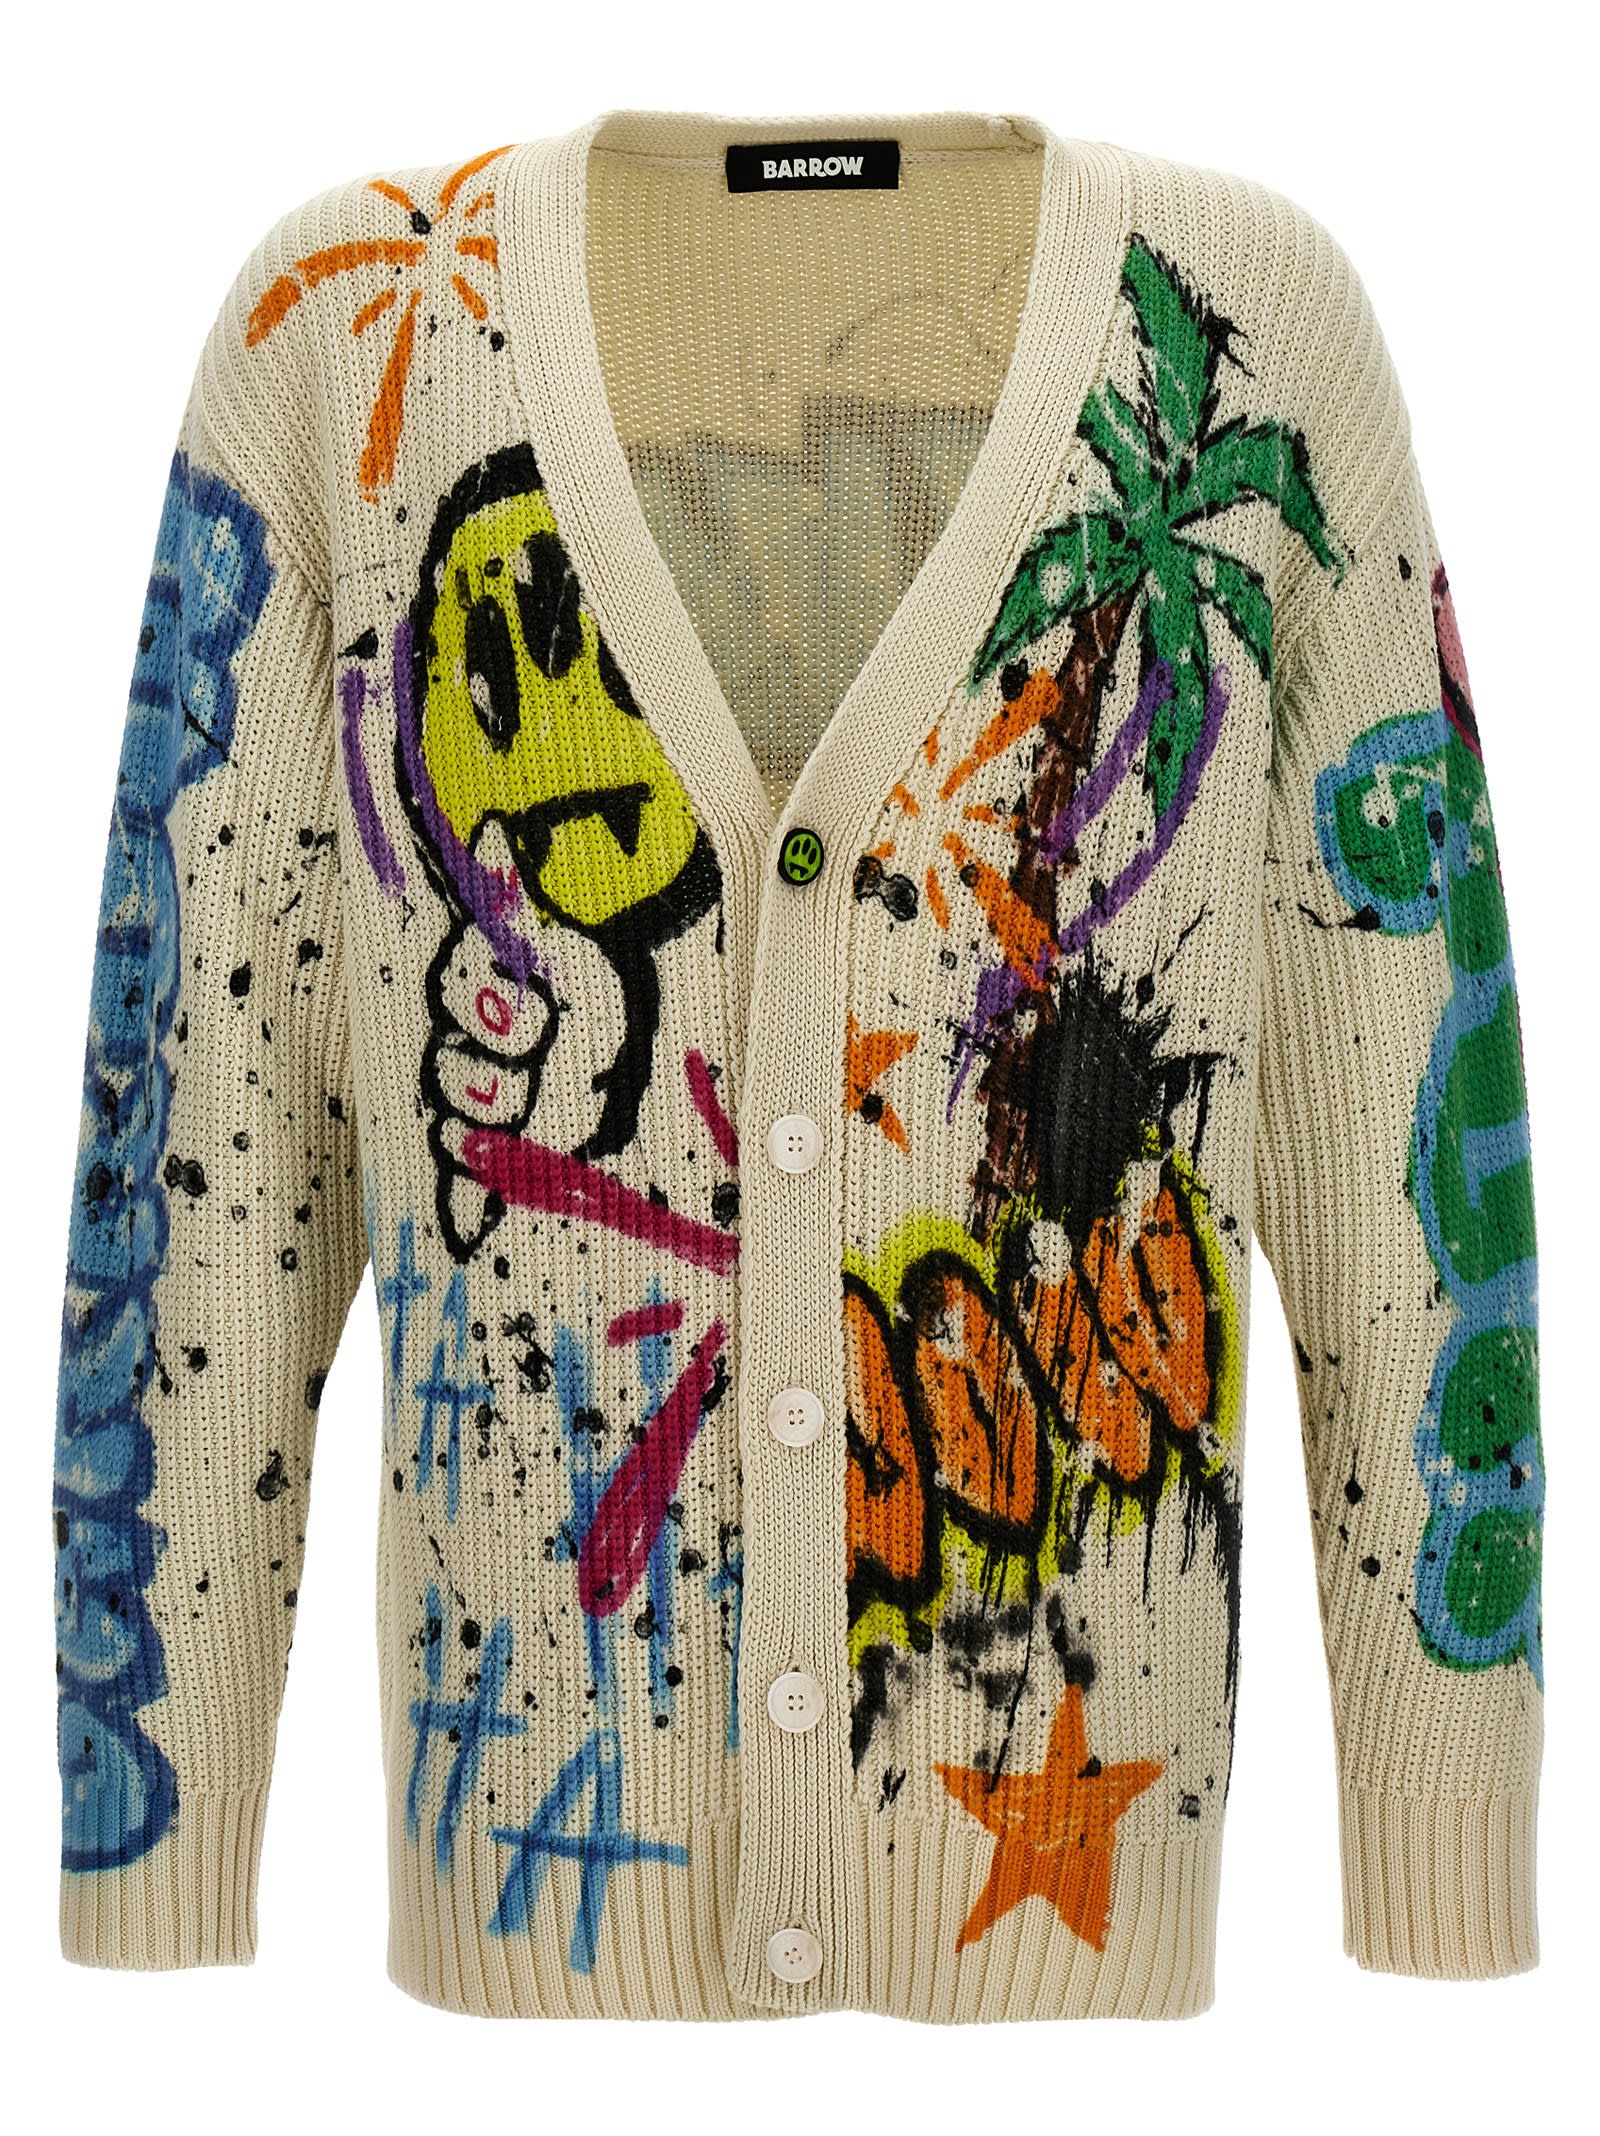 All-over Print Cardigan